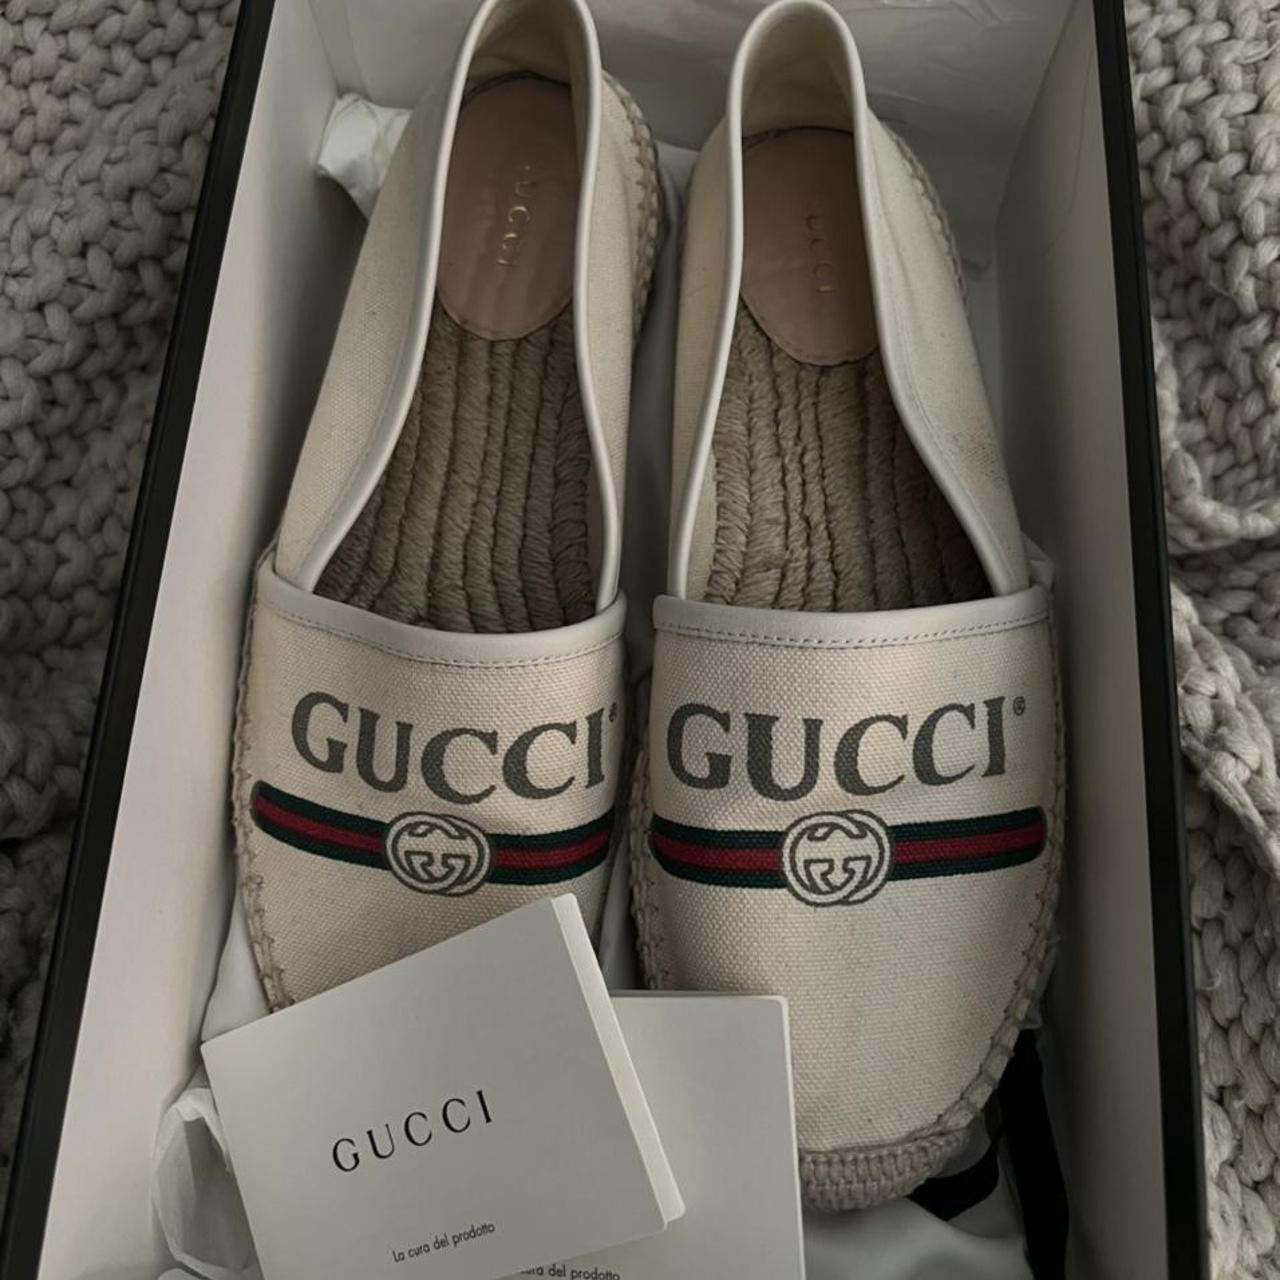 Authentic Gucci espadrilles ❤️ worn twice, comfy and - Depop